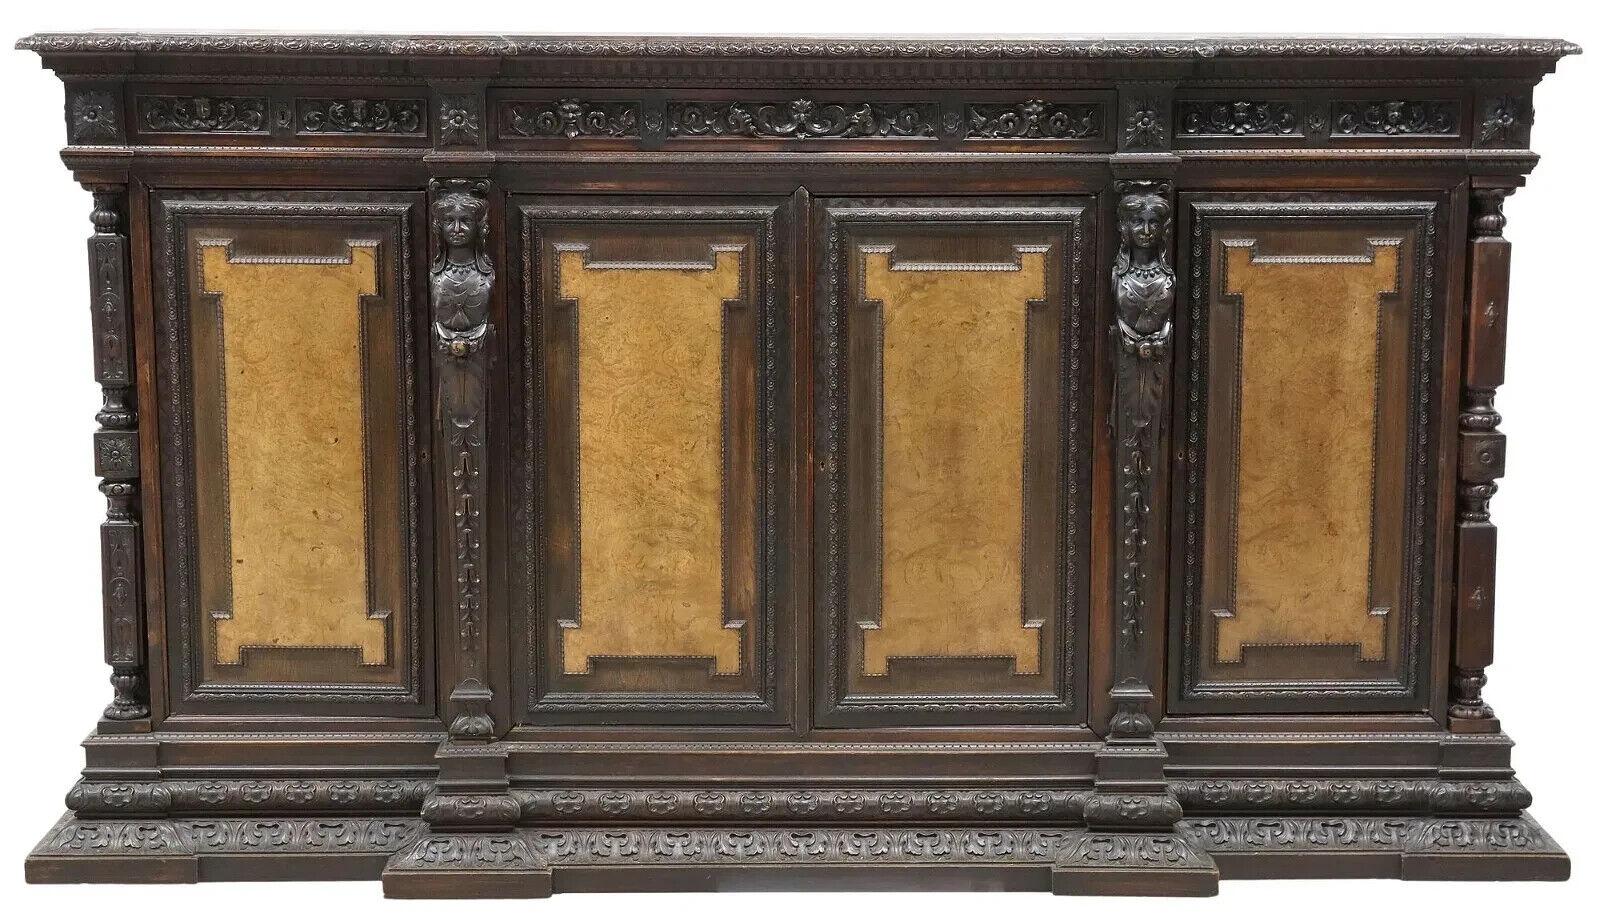 Gorgeous Antique Renaissance Revival Style, Carved, Walnut, 108.5 Ins .L Sideboard!!

Antique Sideboard, Renaissance Revival Style, Breakfront,Carved, Walnut, 108.5 Ins .L, 1800's, 19th Century!!

Renaissance Revival style walnut breakfront